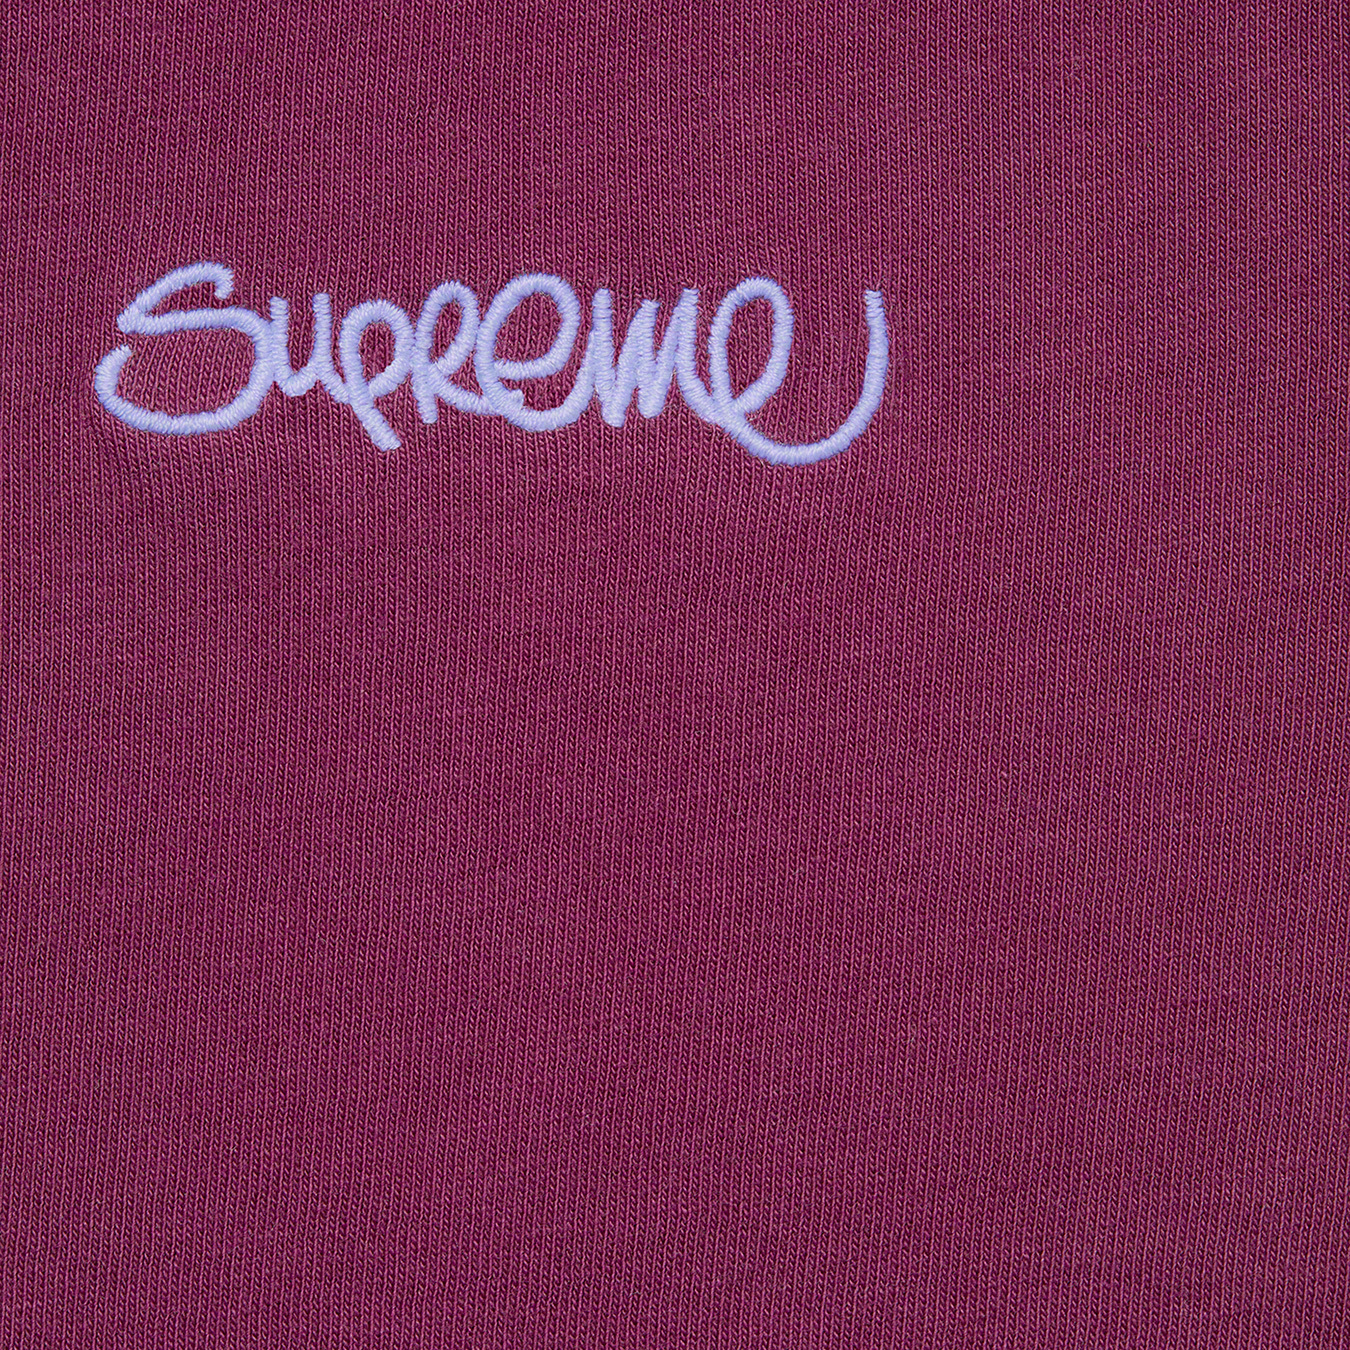 Supreme Washed Handstyle S/S Top